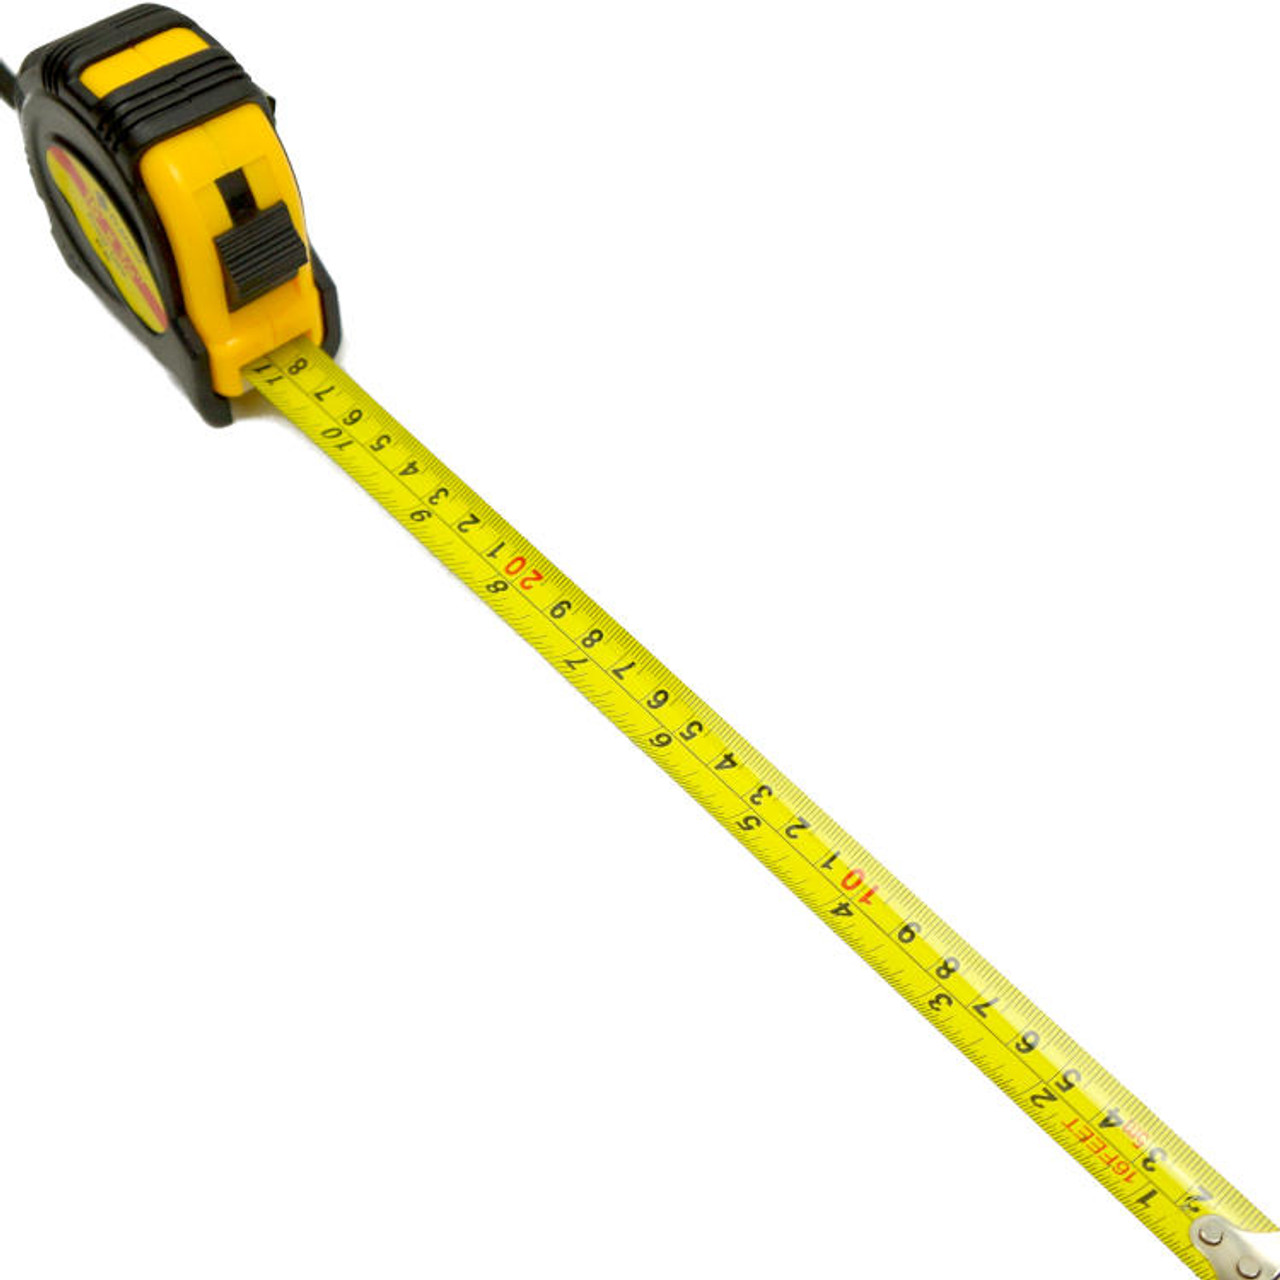 small tape measure keychain clip meter